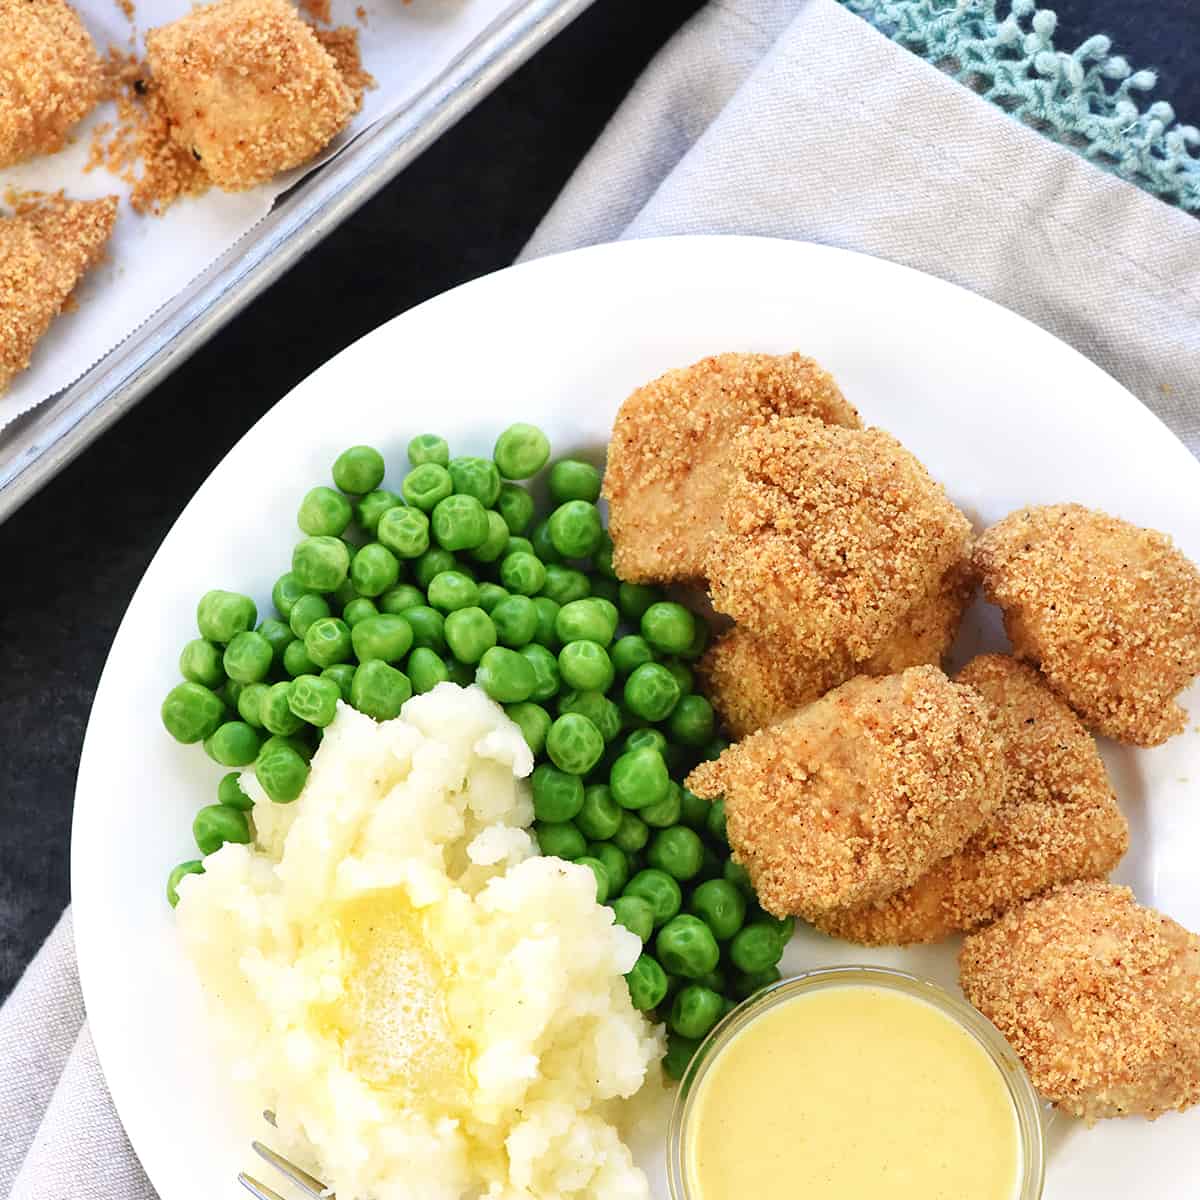 https://www.fivehearthome.com/wp-content/uploads/2017/08/Homemade-Chicken-Nuggets-Recipe_1200pxSquare2.jpg